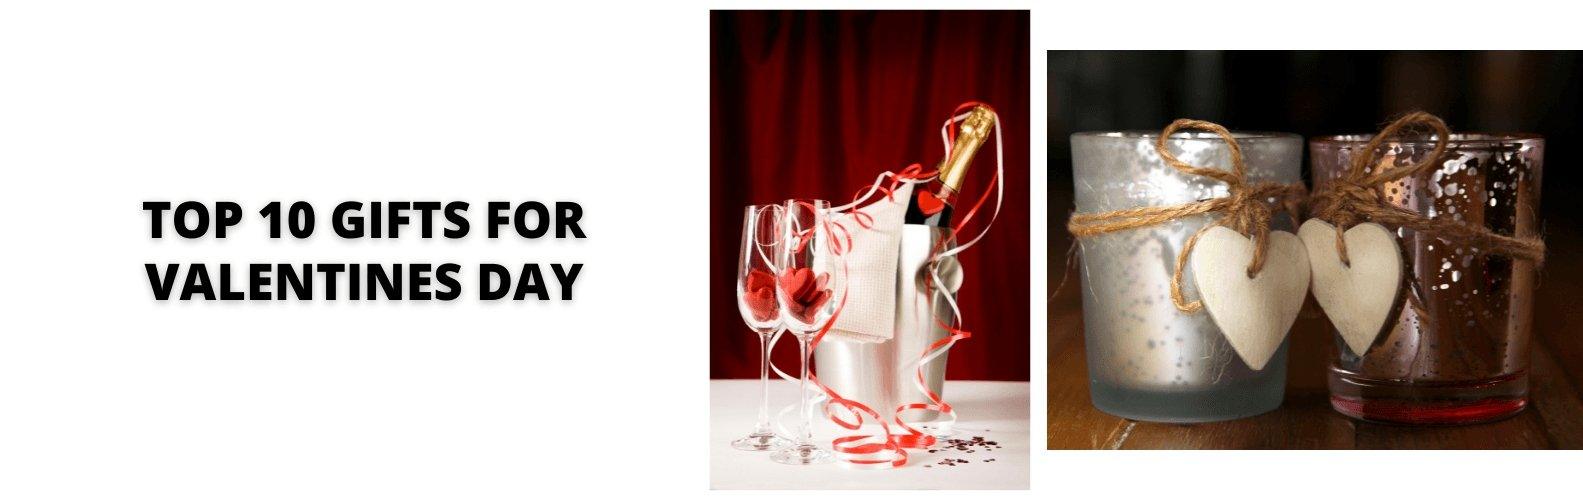 Top 10 Gifts for Valentines Day | Boozehouse - Booze House